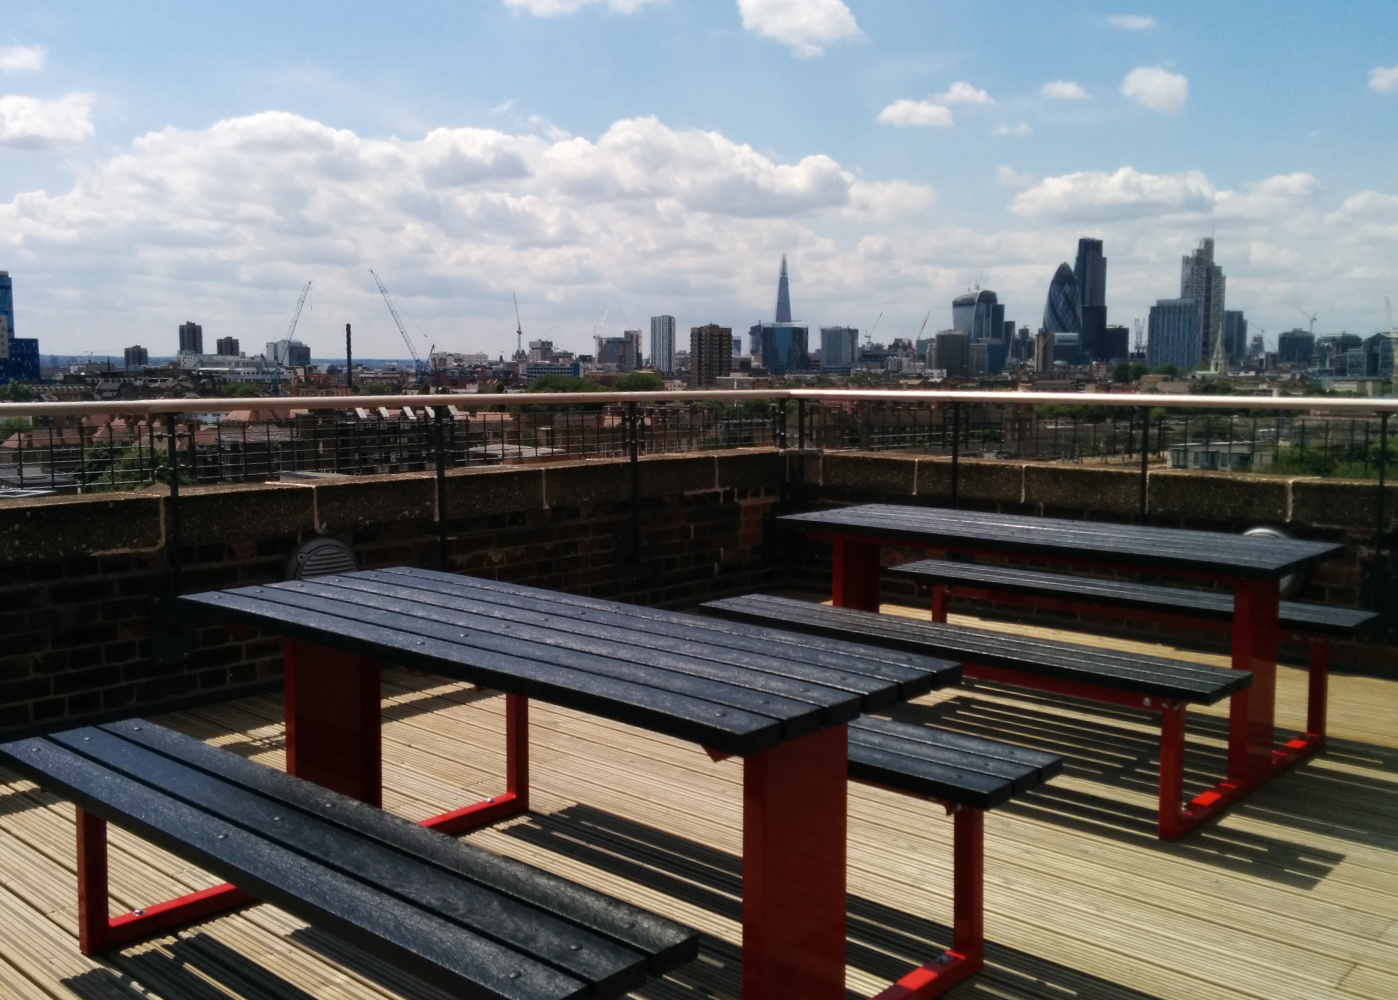 Red and black picnic tables on a London roof terrace